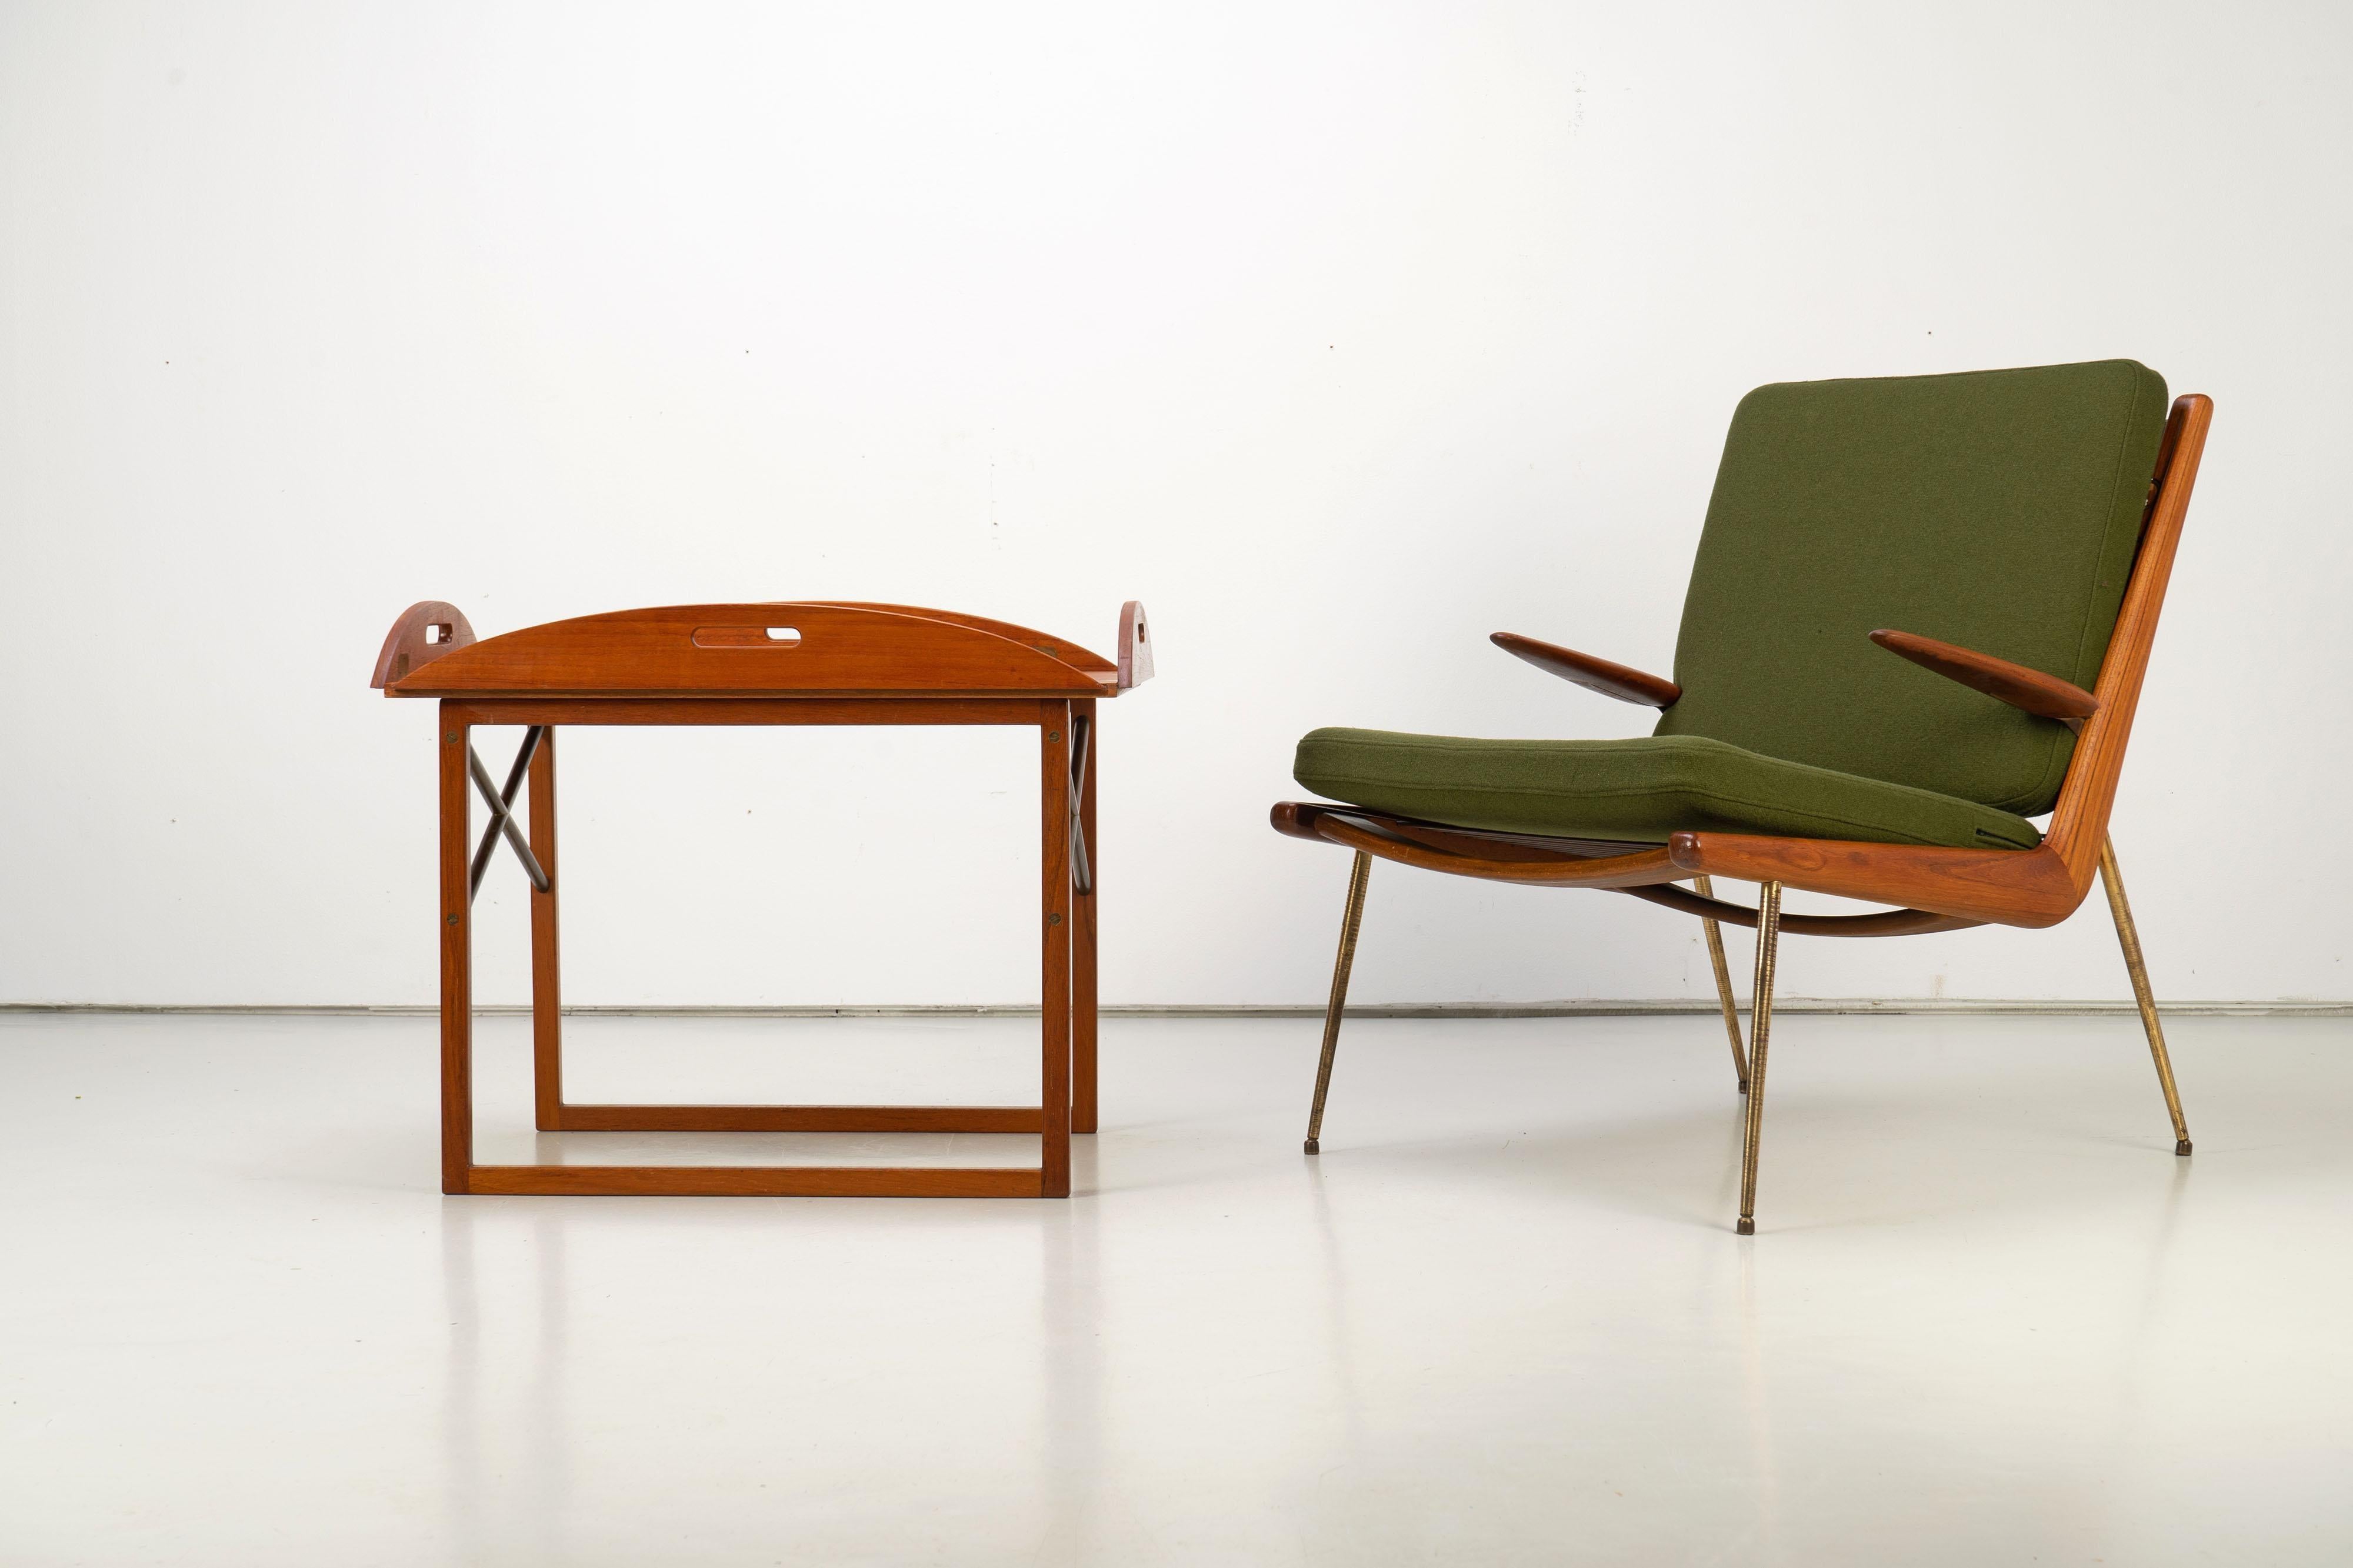 20th Century Danish Tray Table by Svend Langkilde for Illums Bolighus Teak and Brass, 1960s